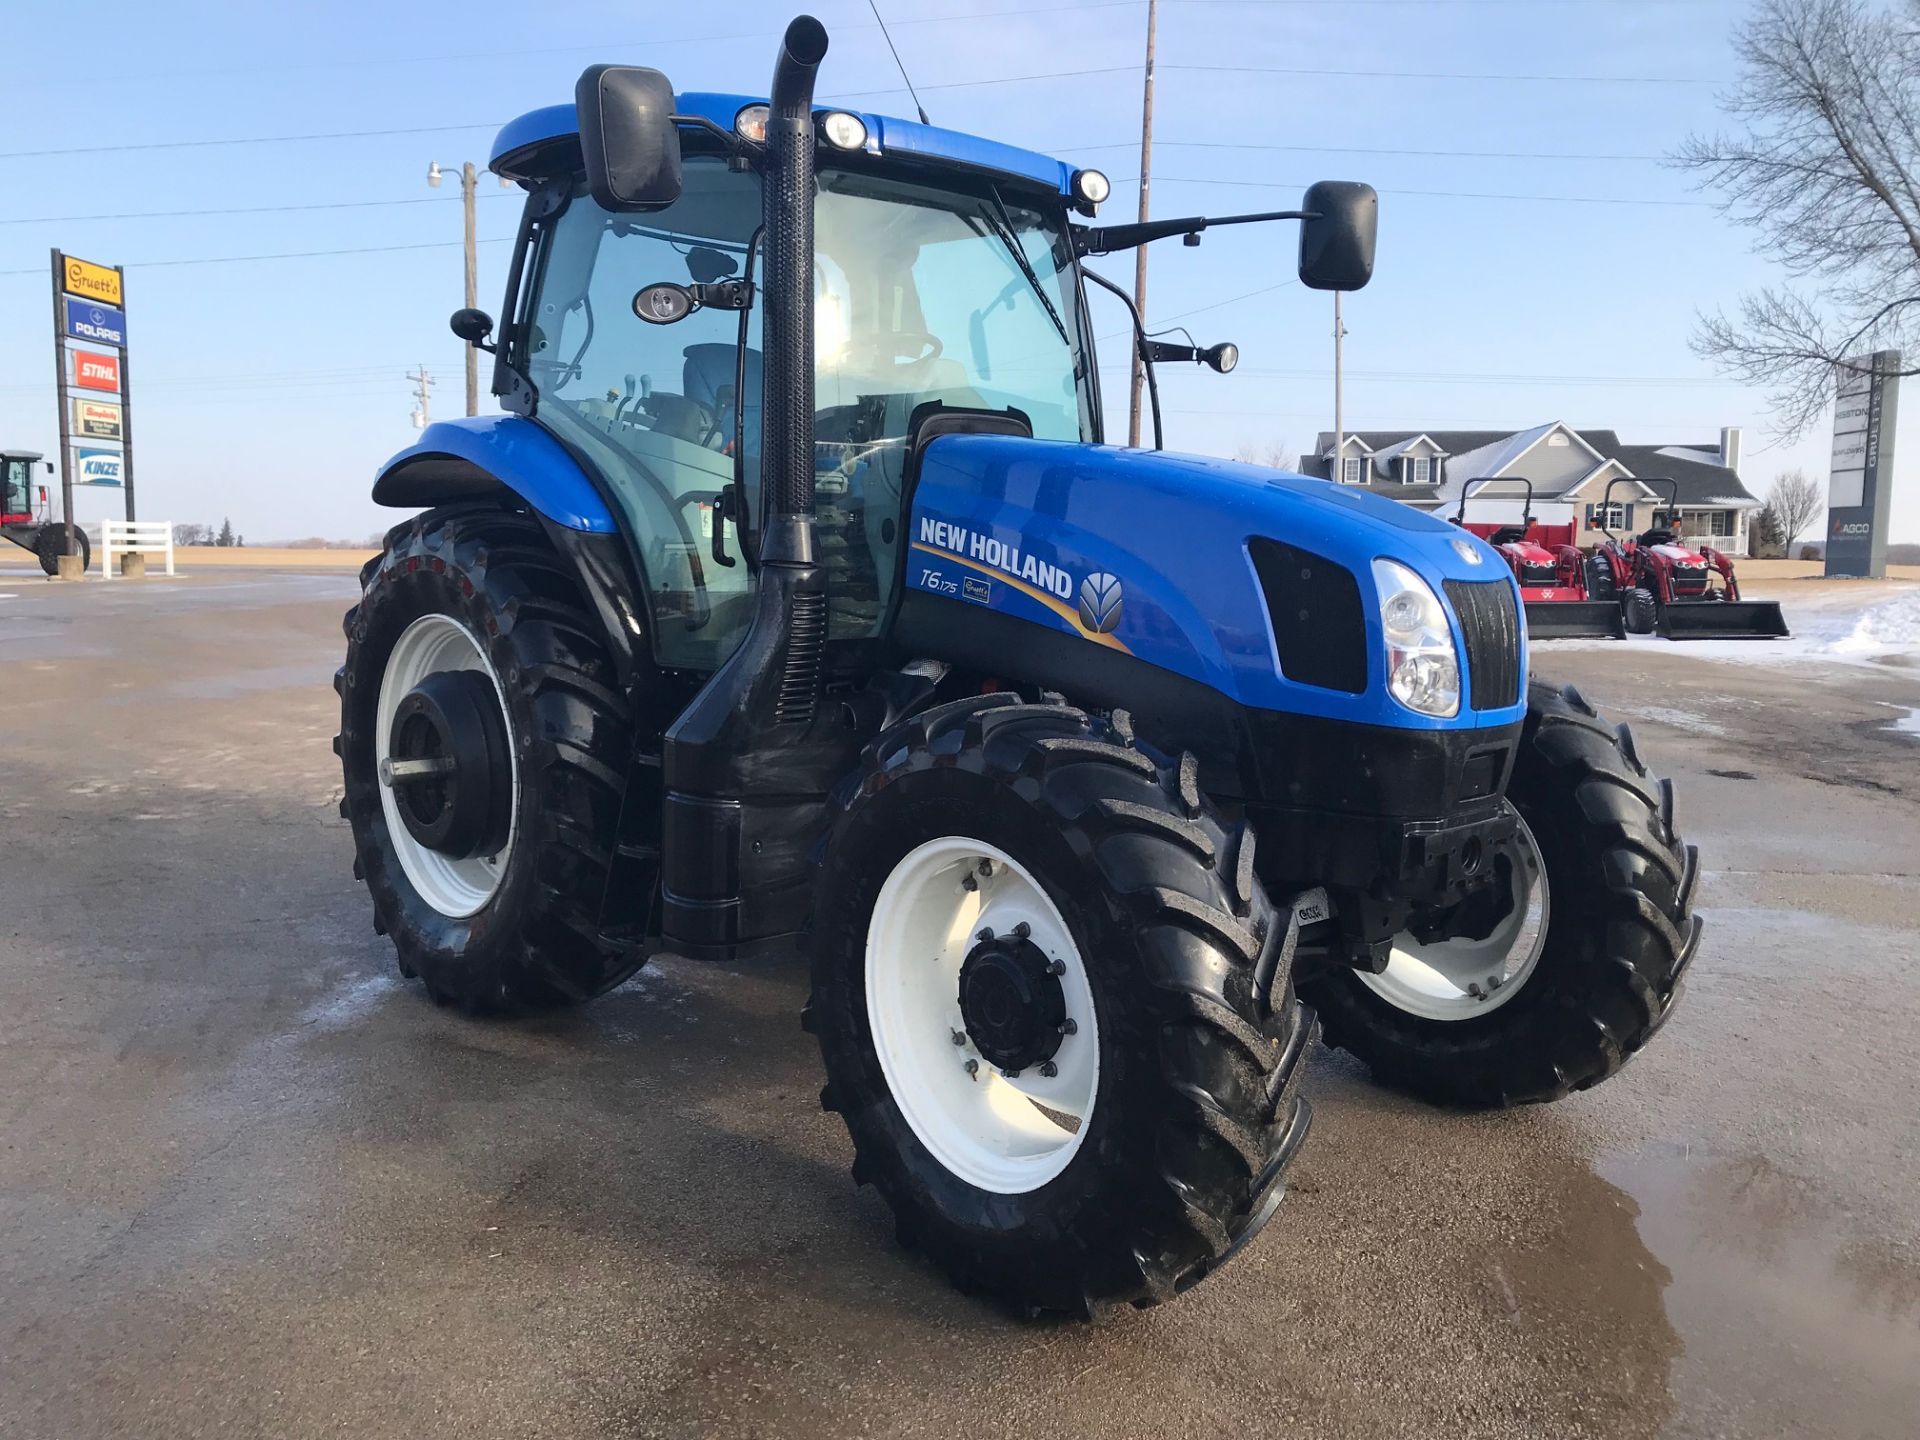 '14 New Holland T6.175 MFWD Tractor, SN ZEBD01738 - Image 6 of 7